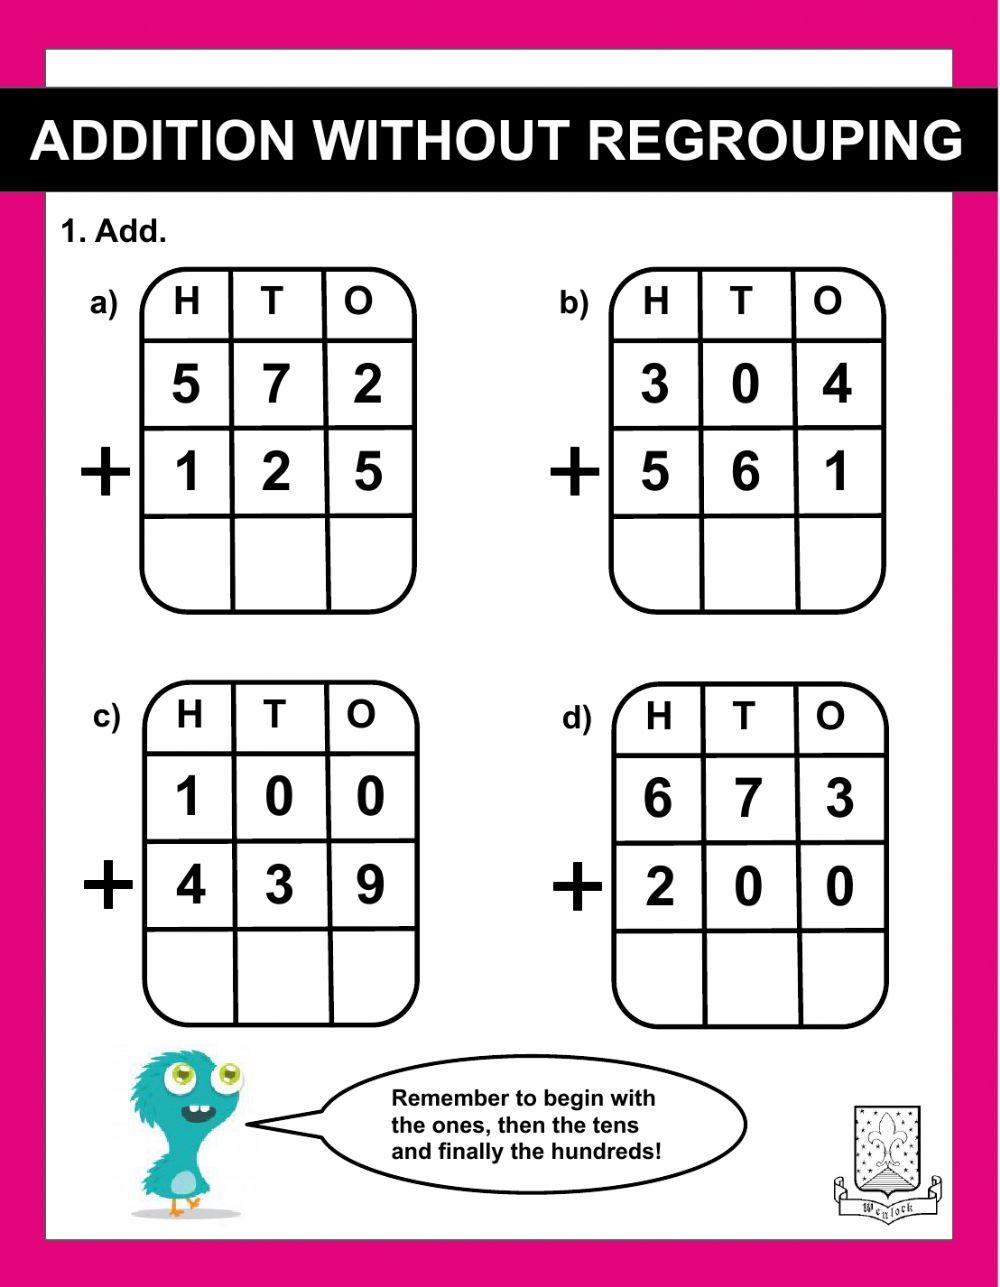 Addition without regrouping